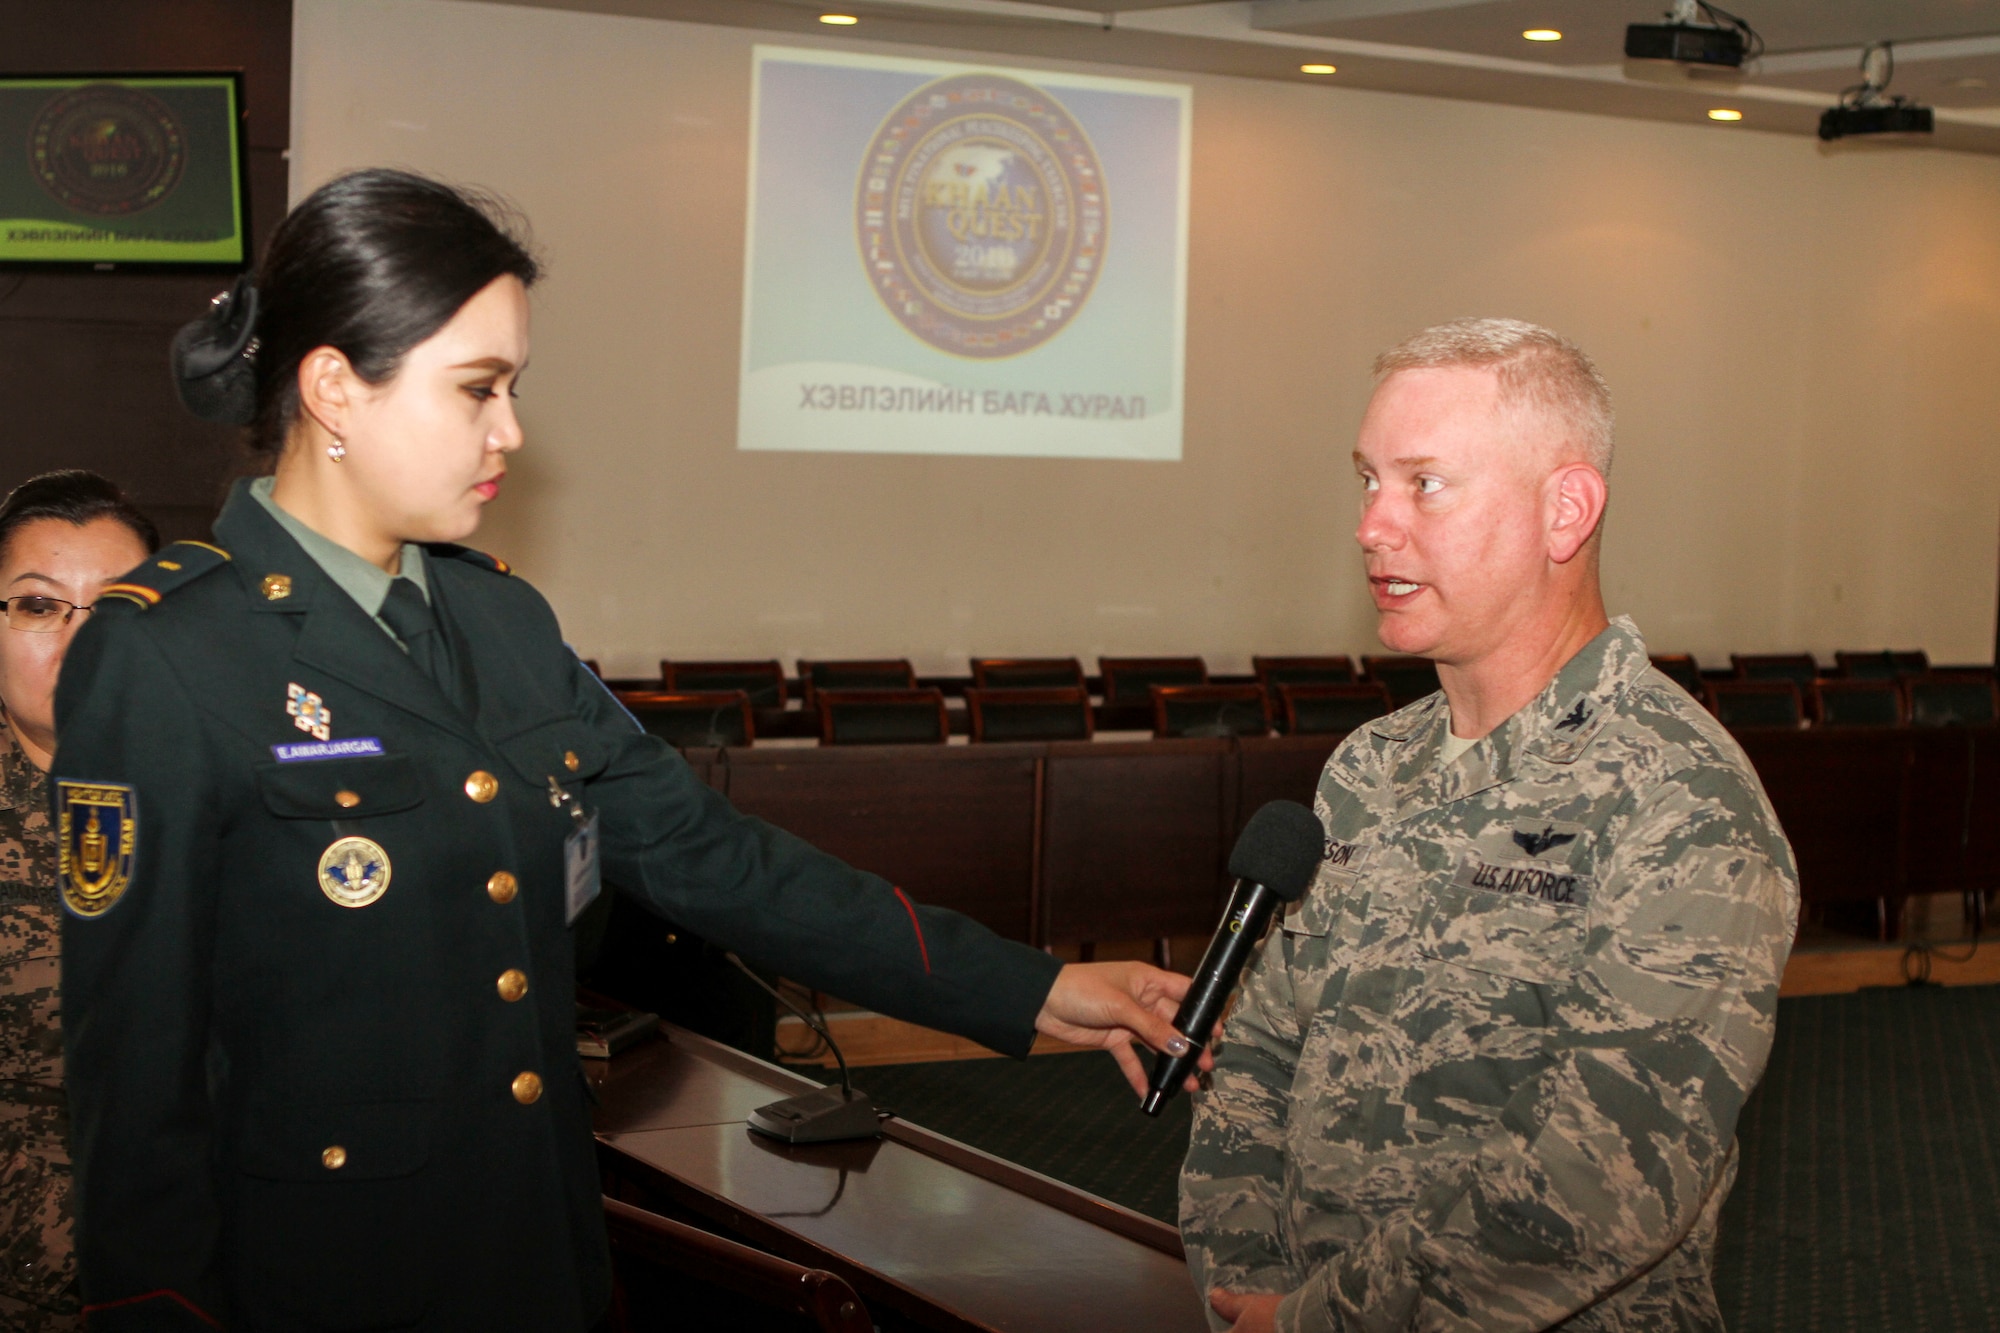 A Mongolian Armed Forces soldier interviews U.S. Air Force Col. Carl Magnusson, exercise co-director for Khaan Quest 16, after a media engagement at the Ministry of Defense, in Ulaanbatar, Mongolia, May 20, 2016. Khaan Quest is an annual, multinational peacekeeping operations exercise conducted in Mongolia and is the capstone exercise for this year's United Nations Global Peace Operations Initiative program. (U.S. Marine Corps photo by Cpl. Hilda M. Becerra / Released)